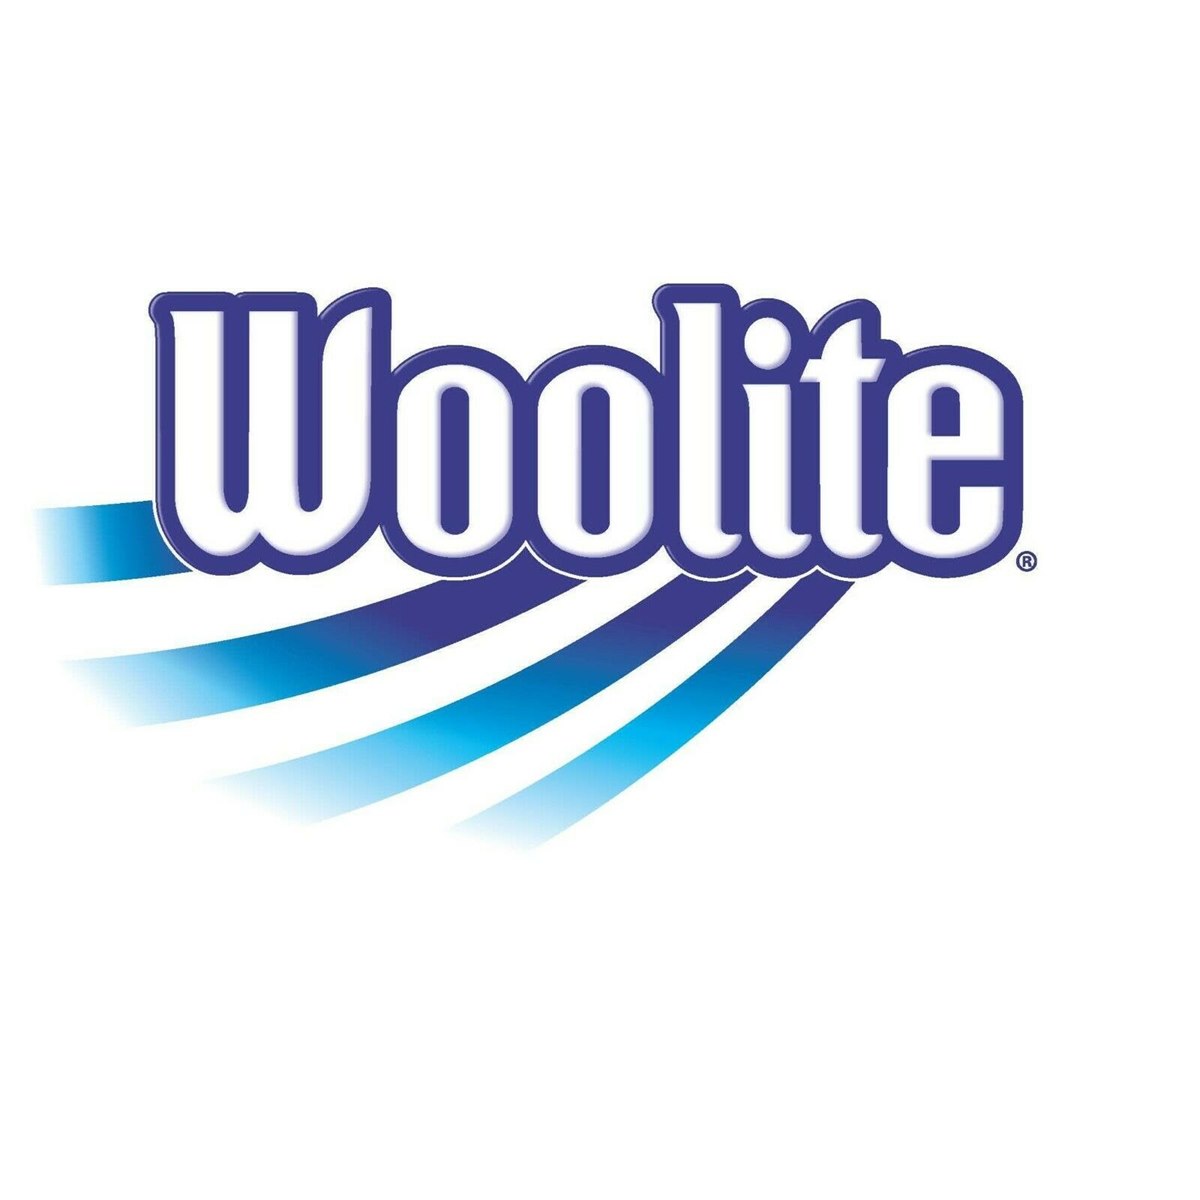 Where to Buy Woolite Products